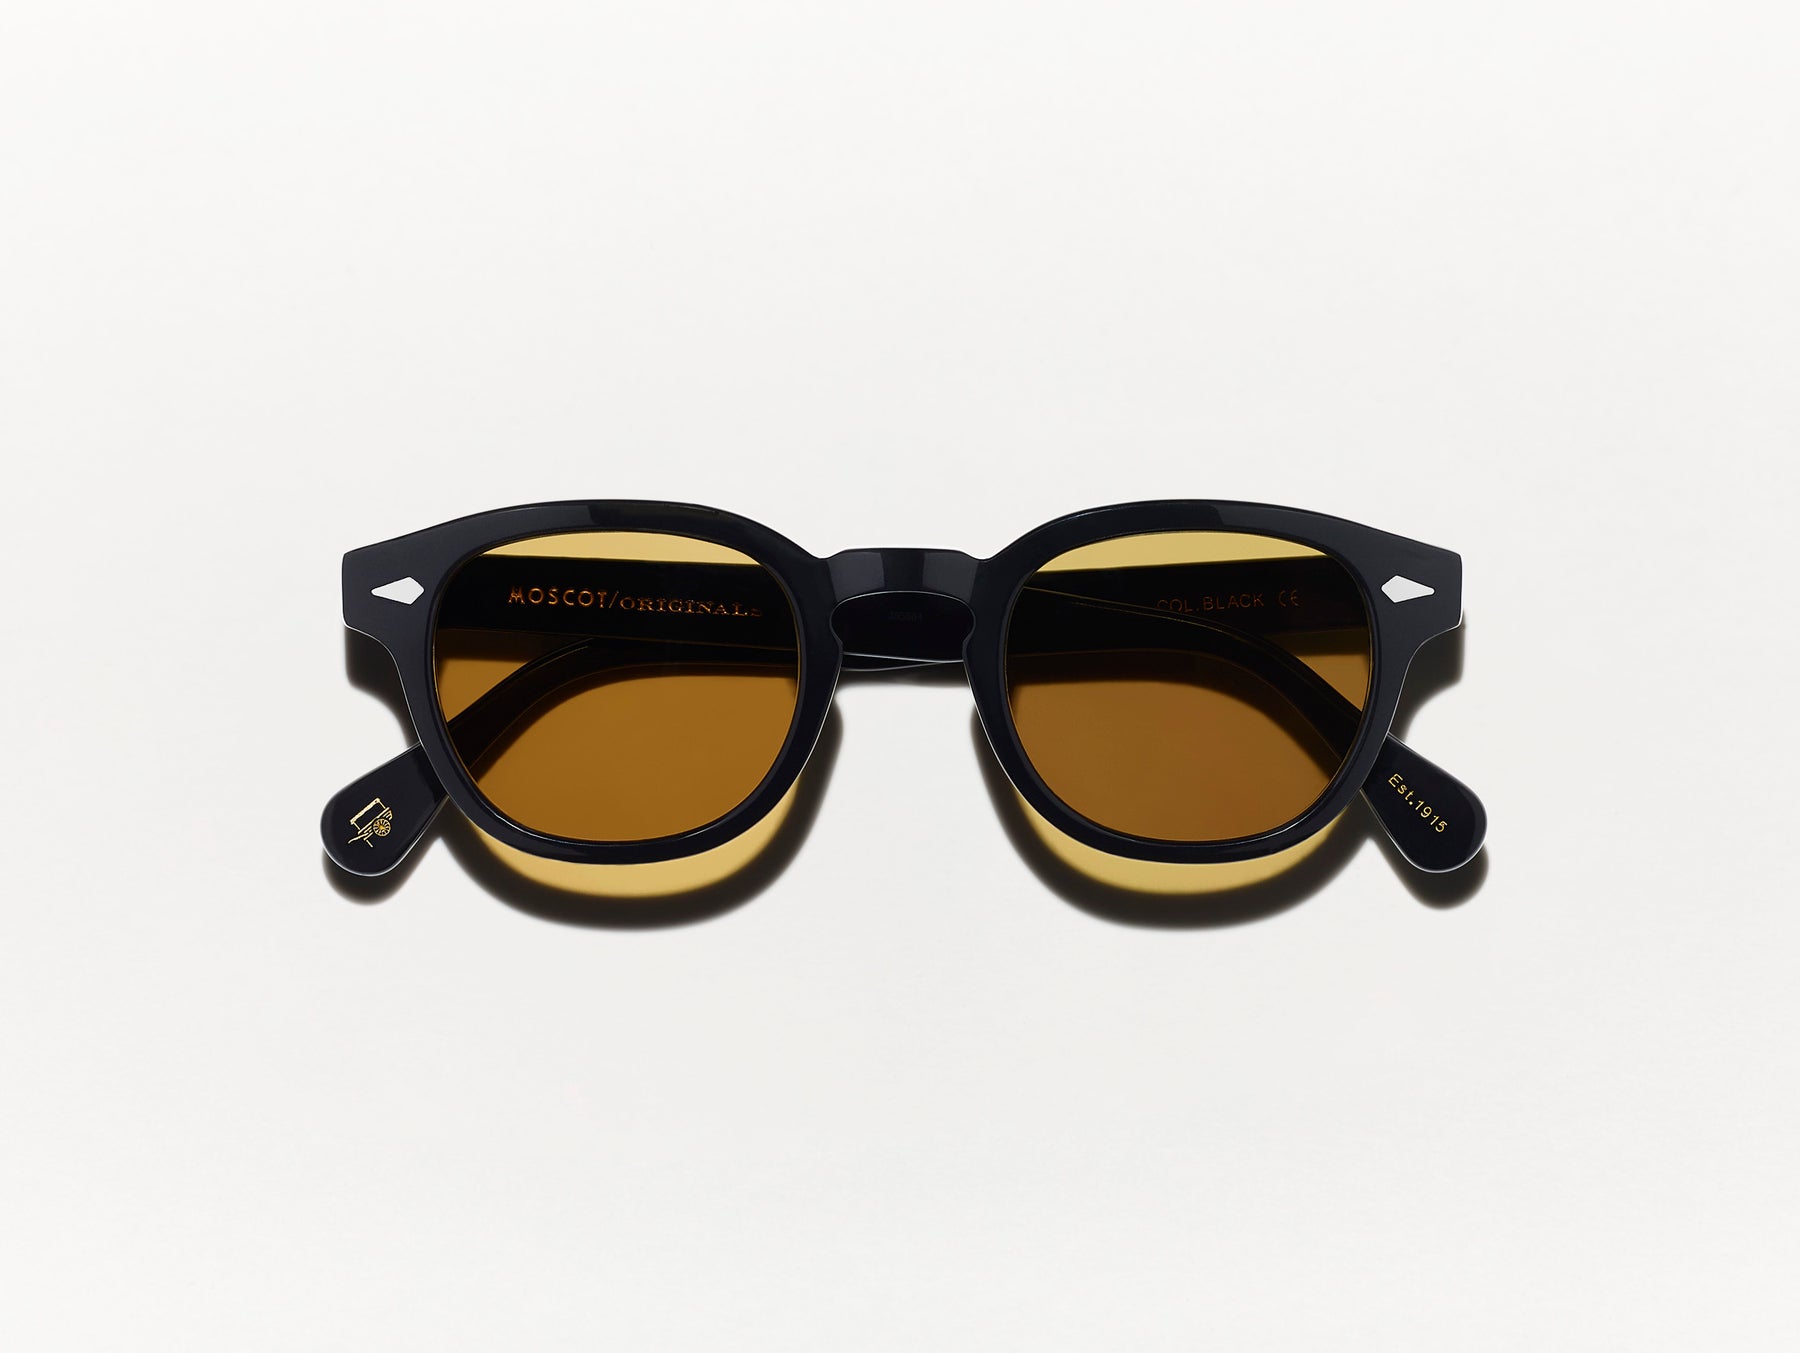 The LEMTOSH Black with Amber Tinted Lenses